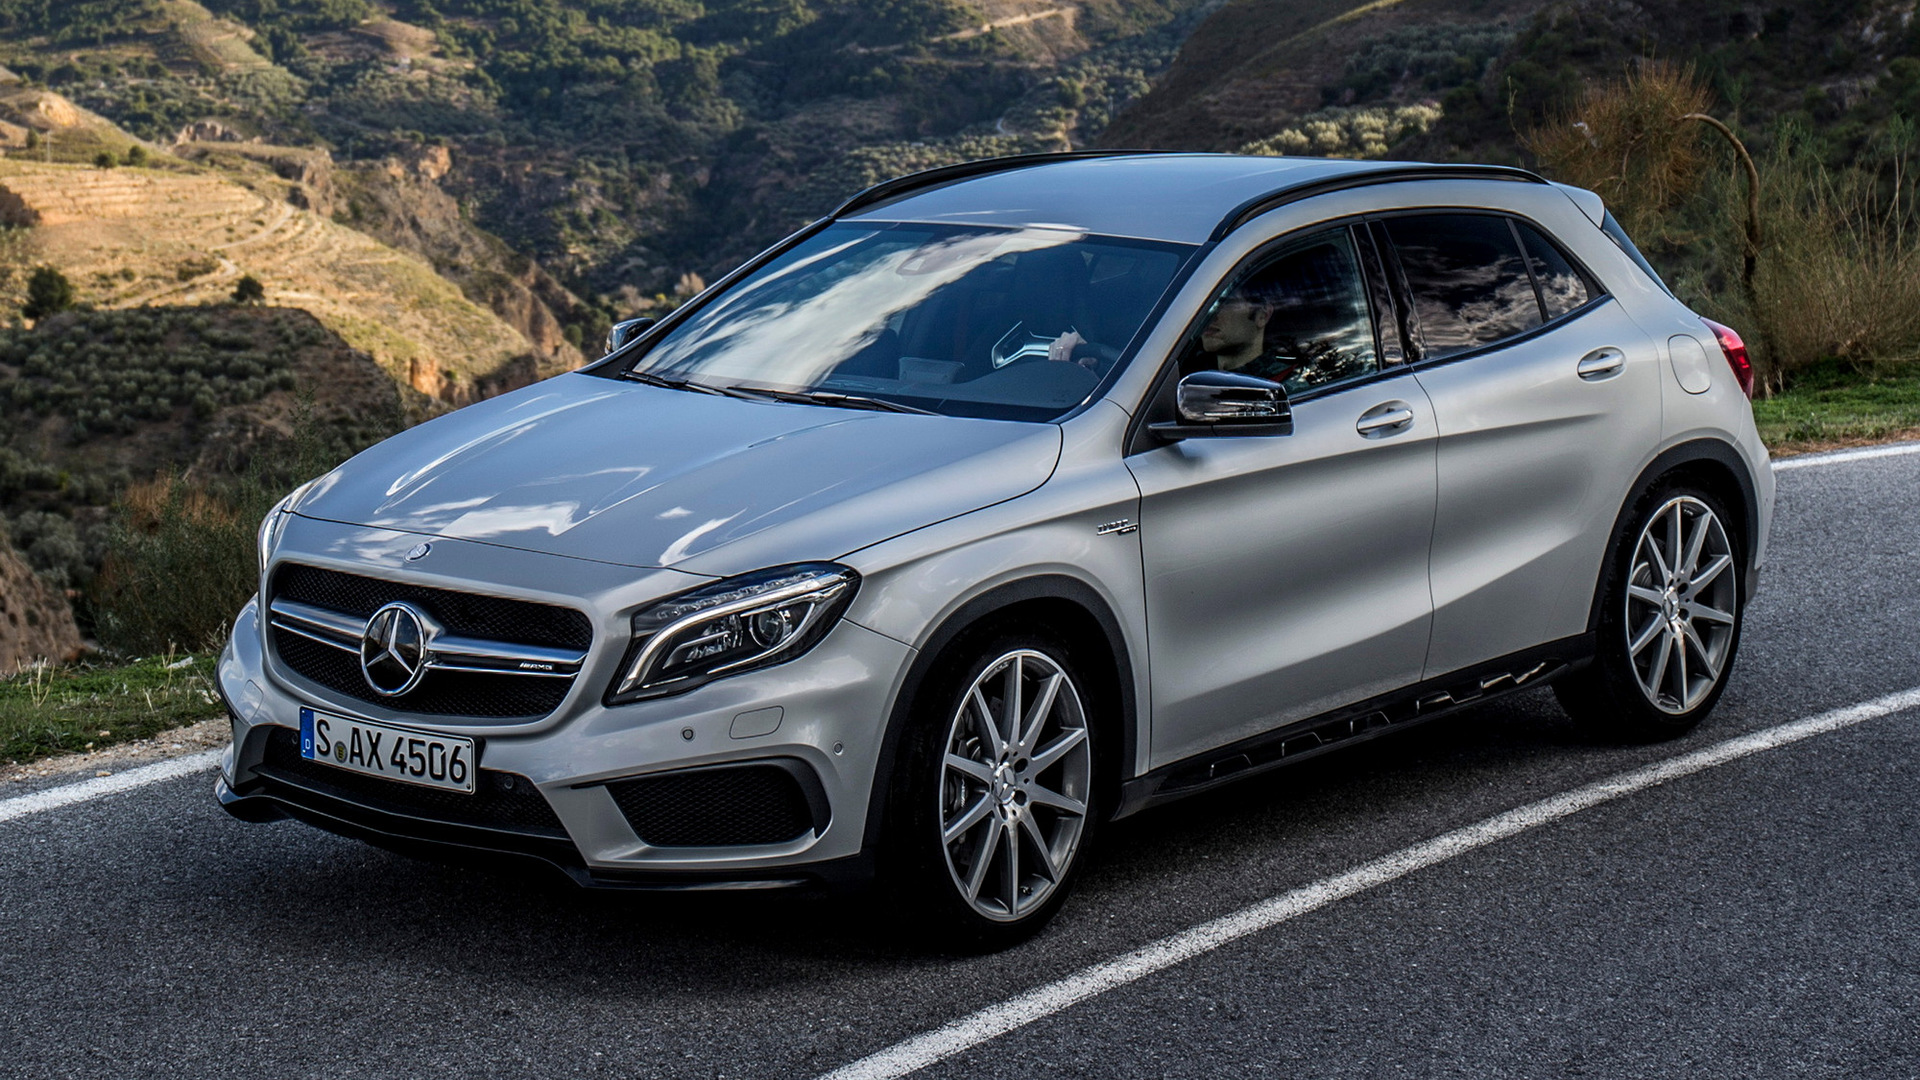 Mercedes-Benz GLA 45 AMG 4Matic (2014) Wallpapers and HD Images